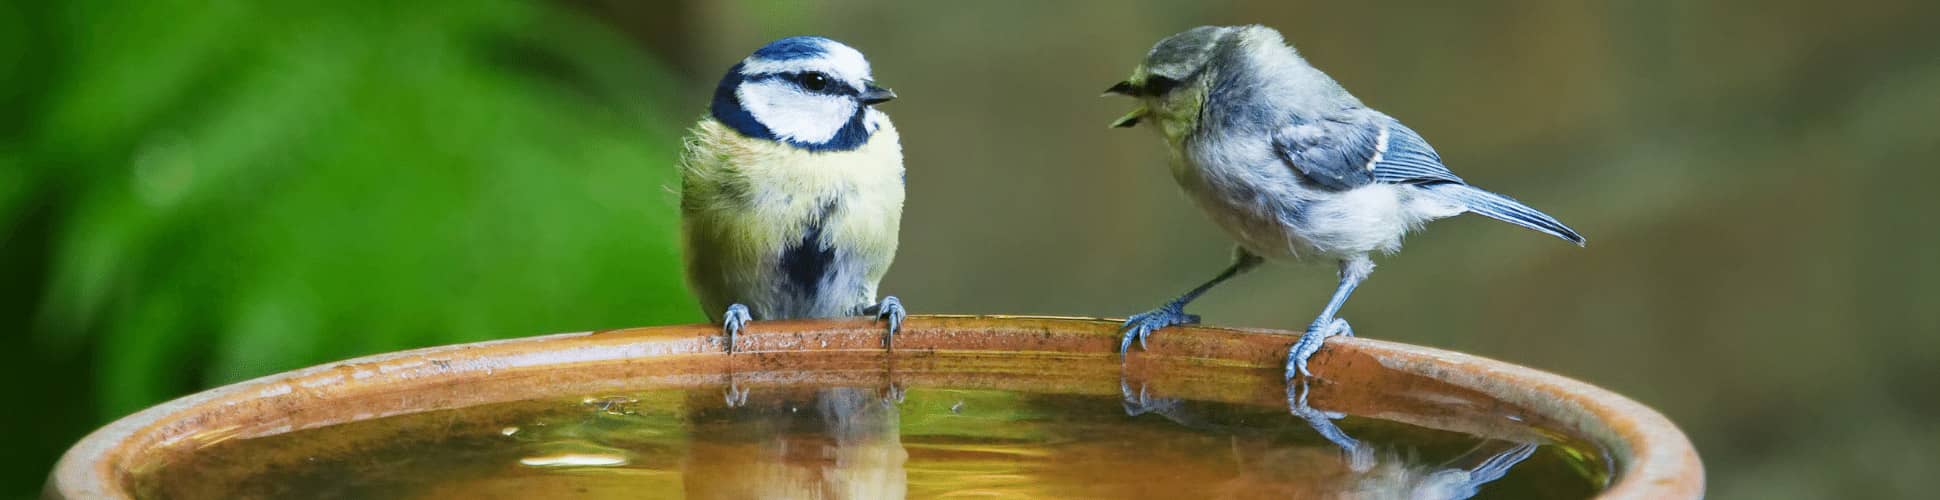 Two blue colored birds perched on the edge of a bird bath with water in it and green trees in the background